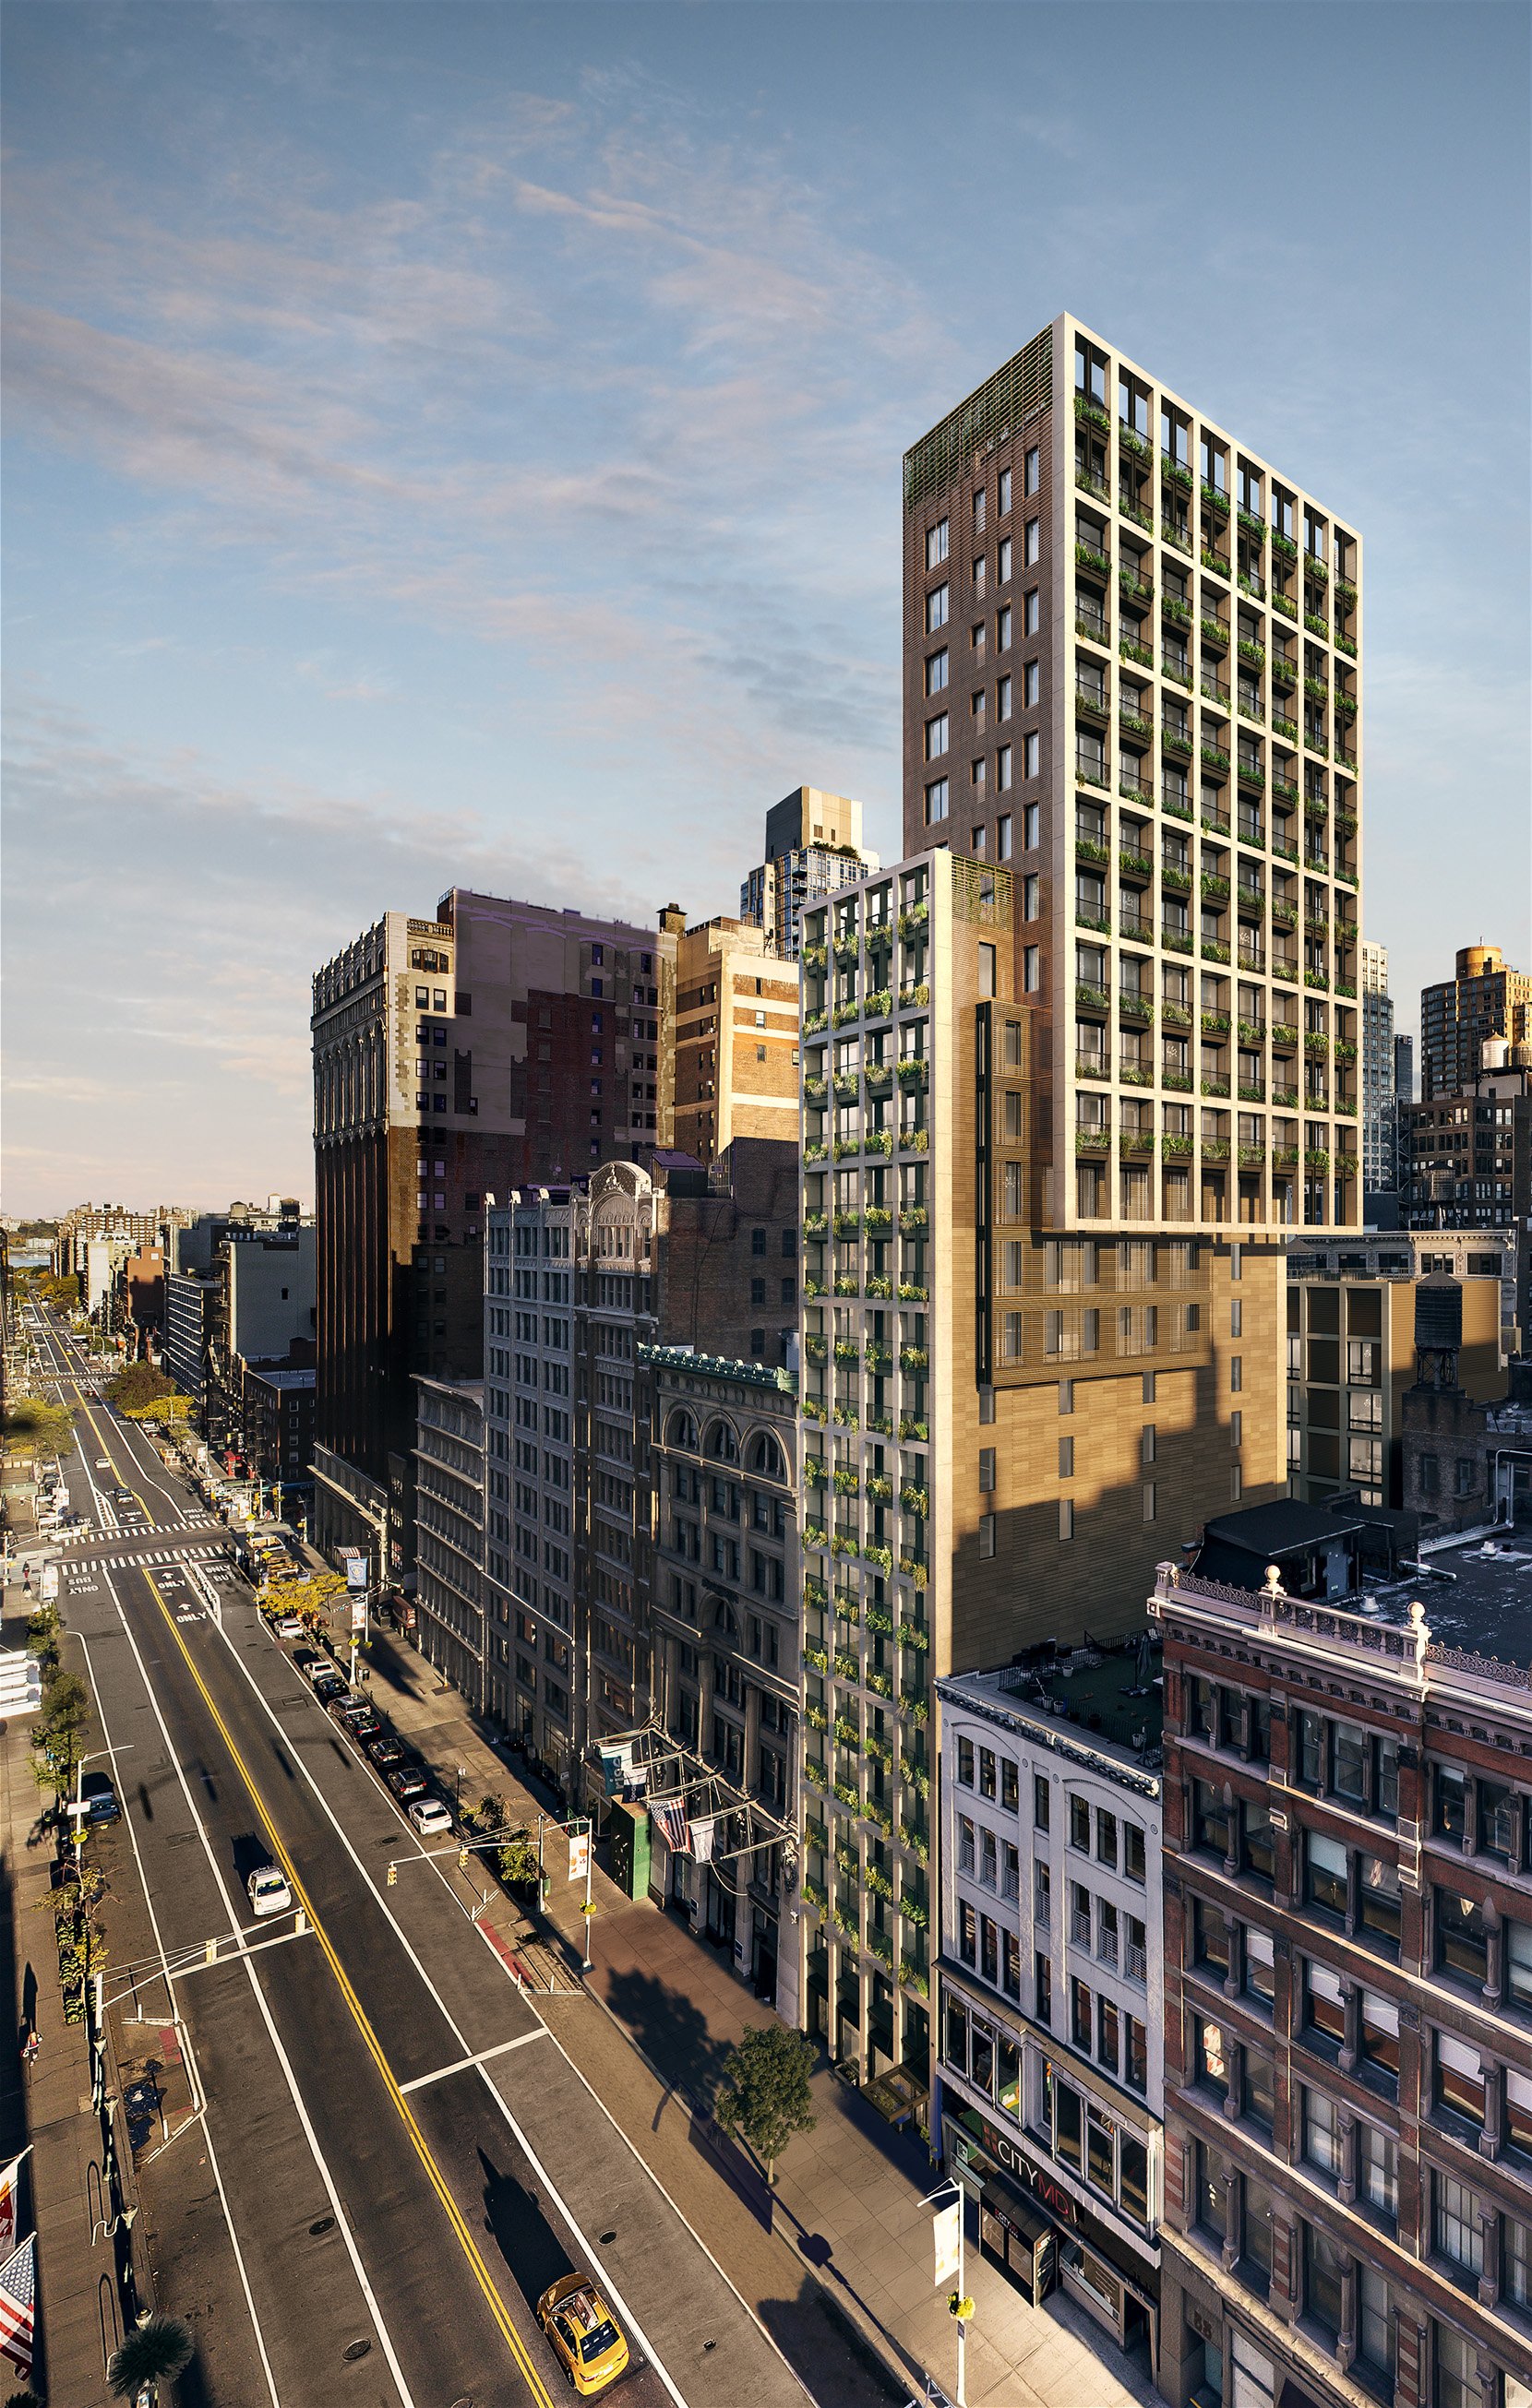  NYC-based real estate development firm Anbau, together with Corcoran Sunshine Marketing Group, today announced the launch of sales at    Flatiron House , a new luxury condominium located at 39 West 23rd Street in the heart of the Flatiron District, 